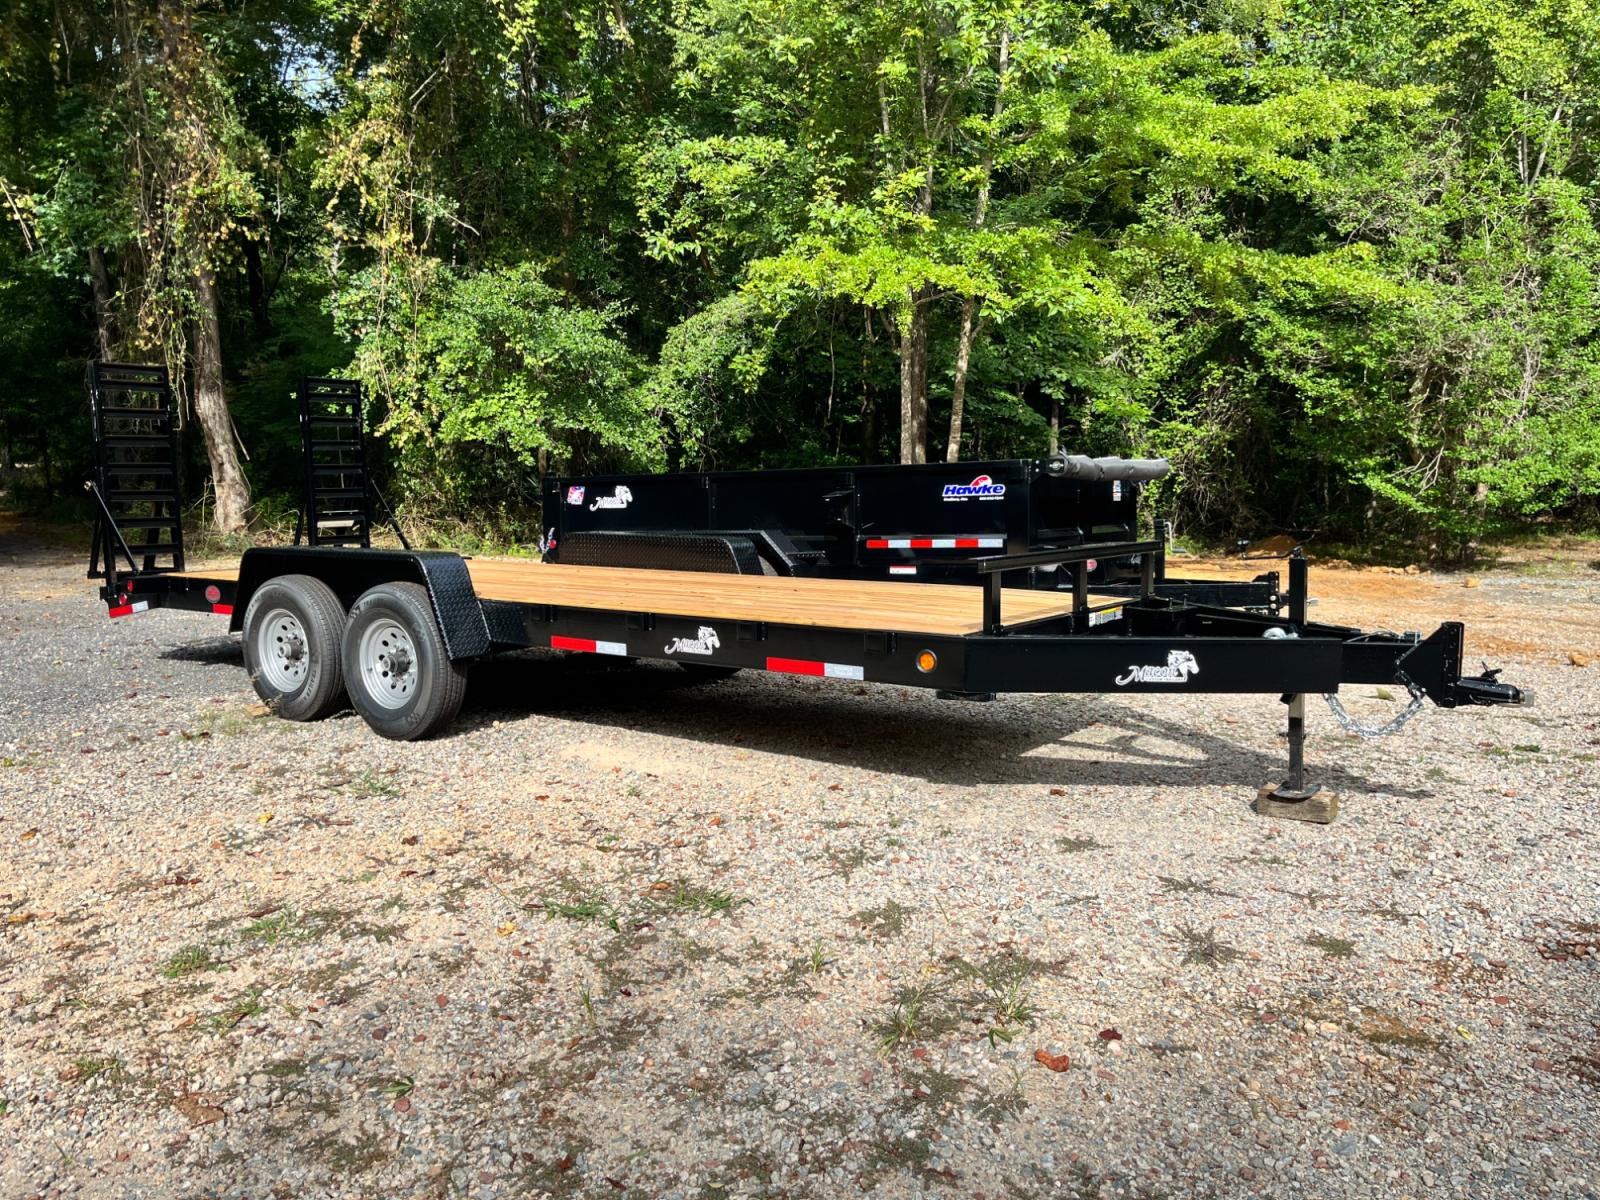 2022 Macon Custom Trailers 7ft X 20ft Flatbed 7 Ton , located at 1330 Rainey Rd., Macon, 31220, (478) 960-1044, 32.845638, -83.778687 - Brand New 2022 Model "Top of the Line" Flatbed BobCat & Equipment Trailer! 7ft X 20ft Including the 24" Beavertail 7k lb Brake Axles! Haul Your Truck, Tractor, BobCat, Mini-Excavator, UTV's, ATV's Etc. Tandem 7,000lb Dexter Axles, Electric Brakes on Both Axles too! 235/80X16" Radials 8" Channel - Photo #0